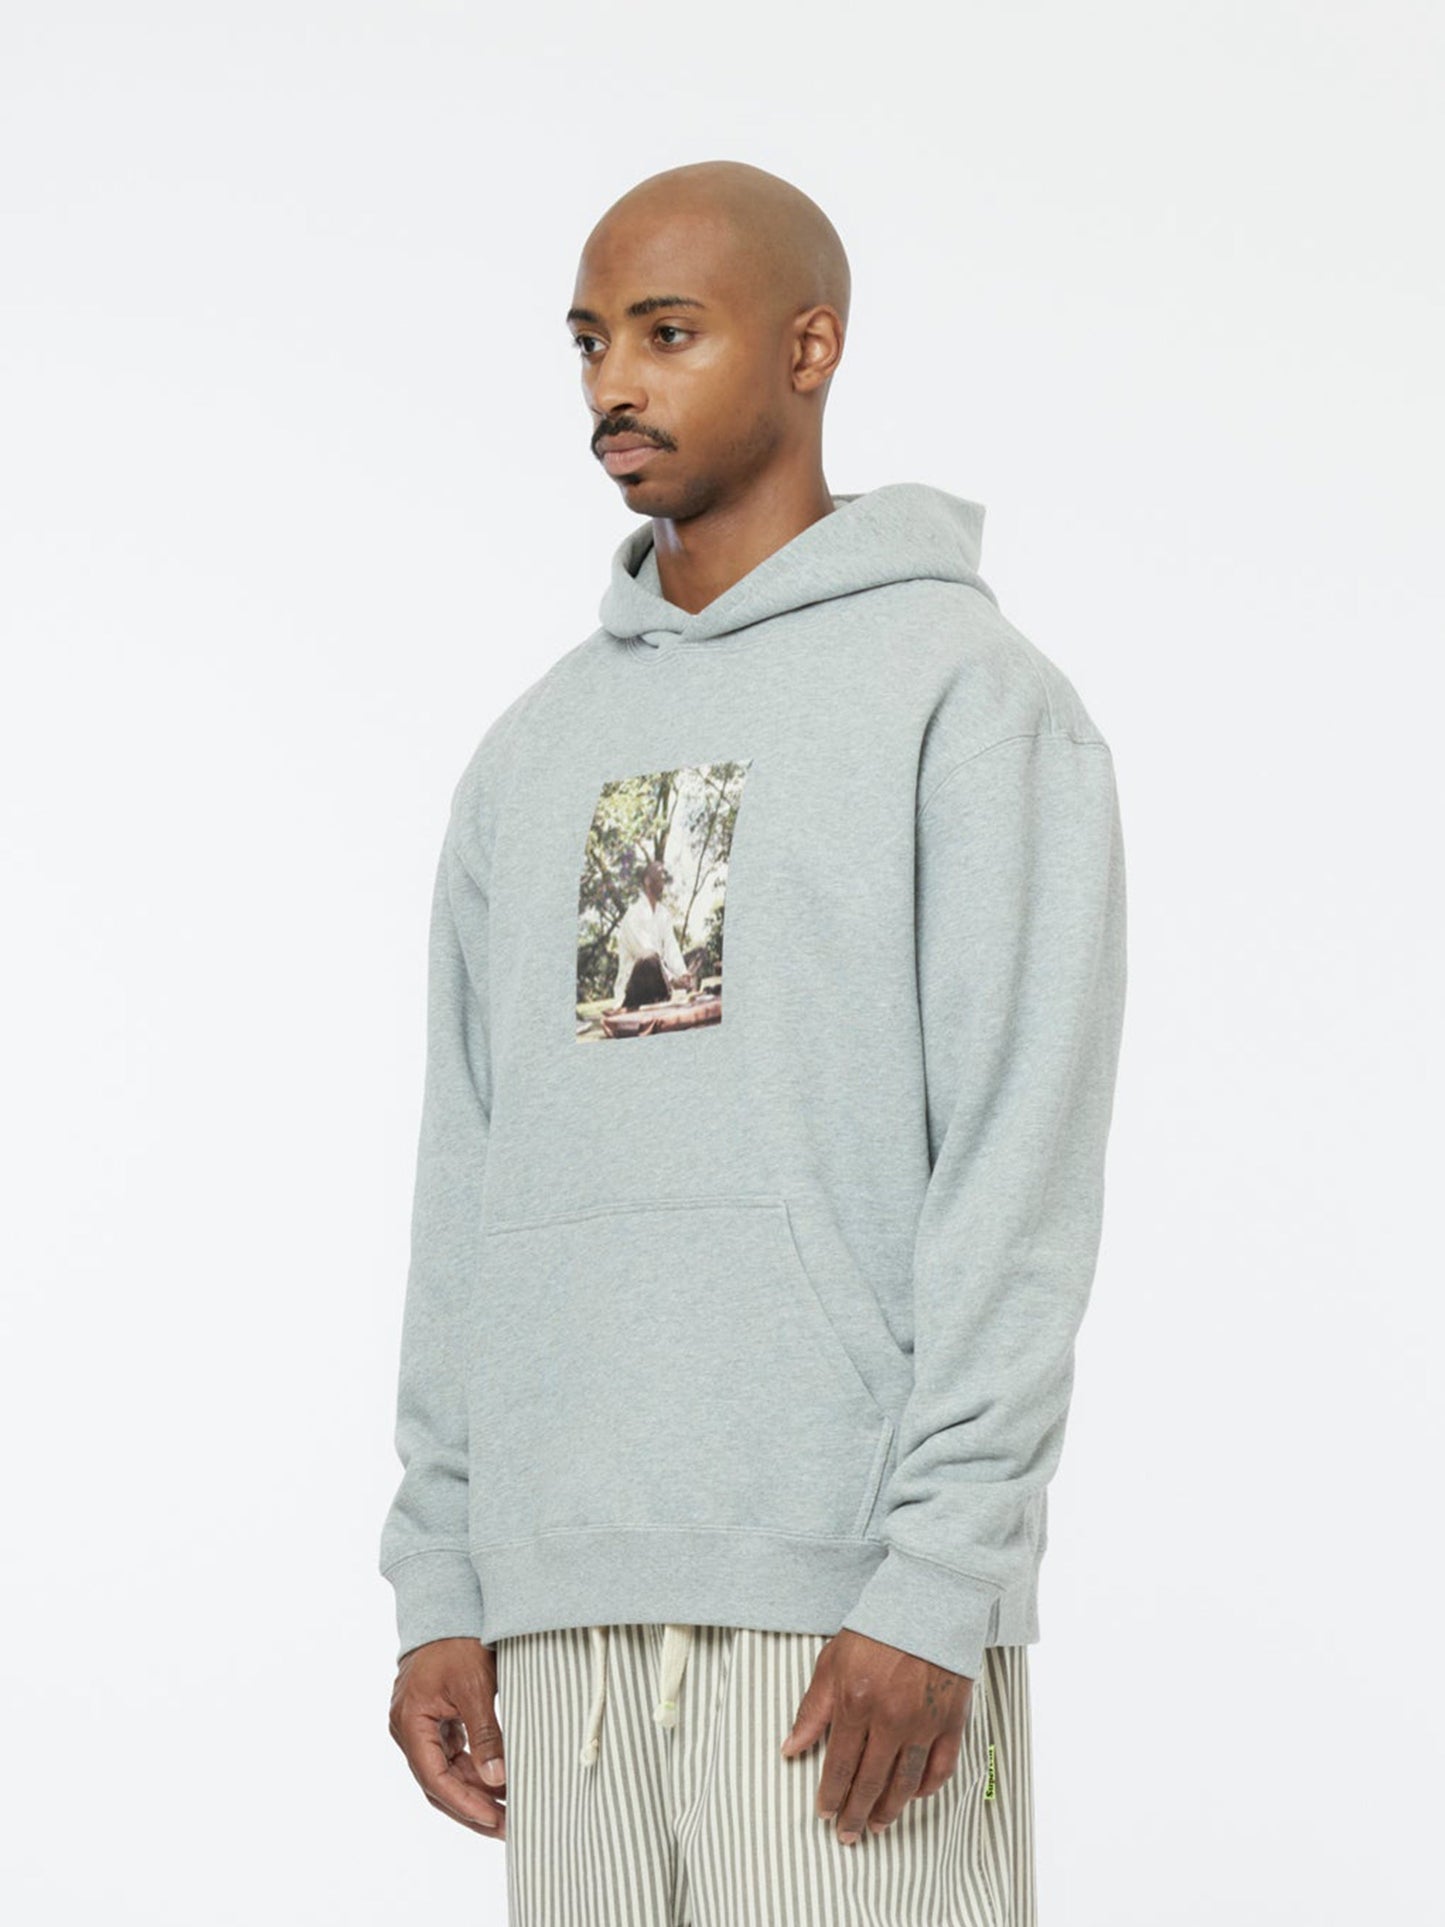 Inside Out Hoodie (Heather Grey)